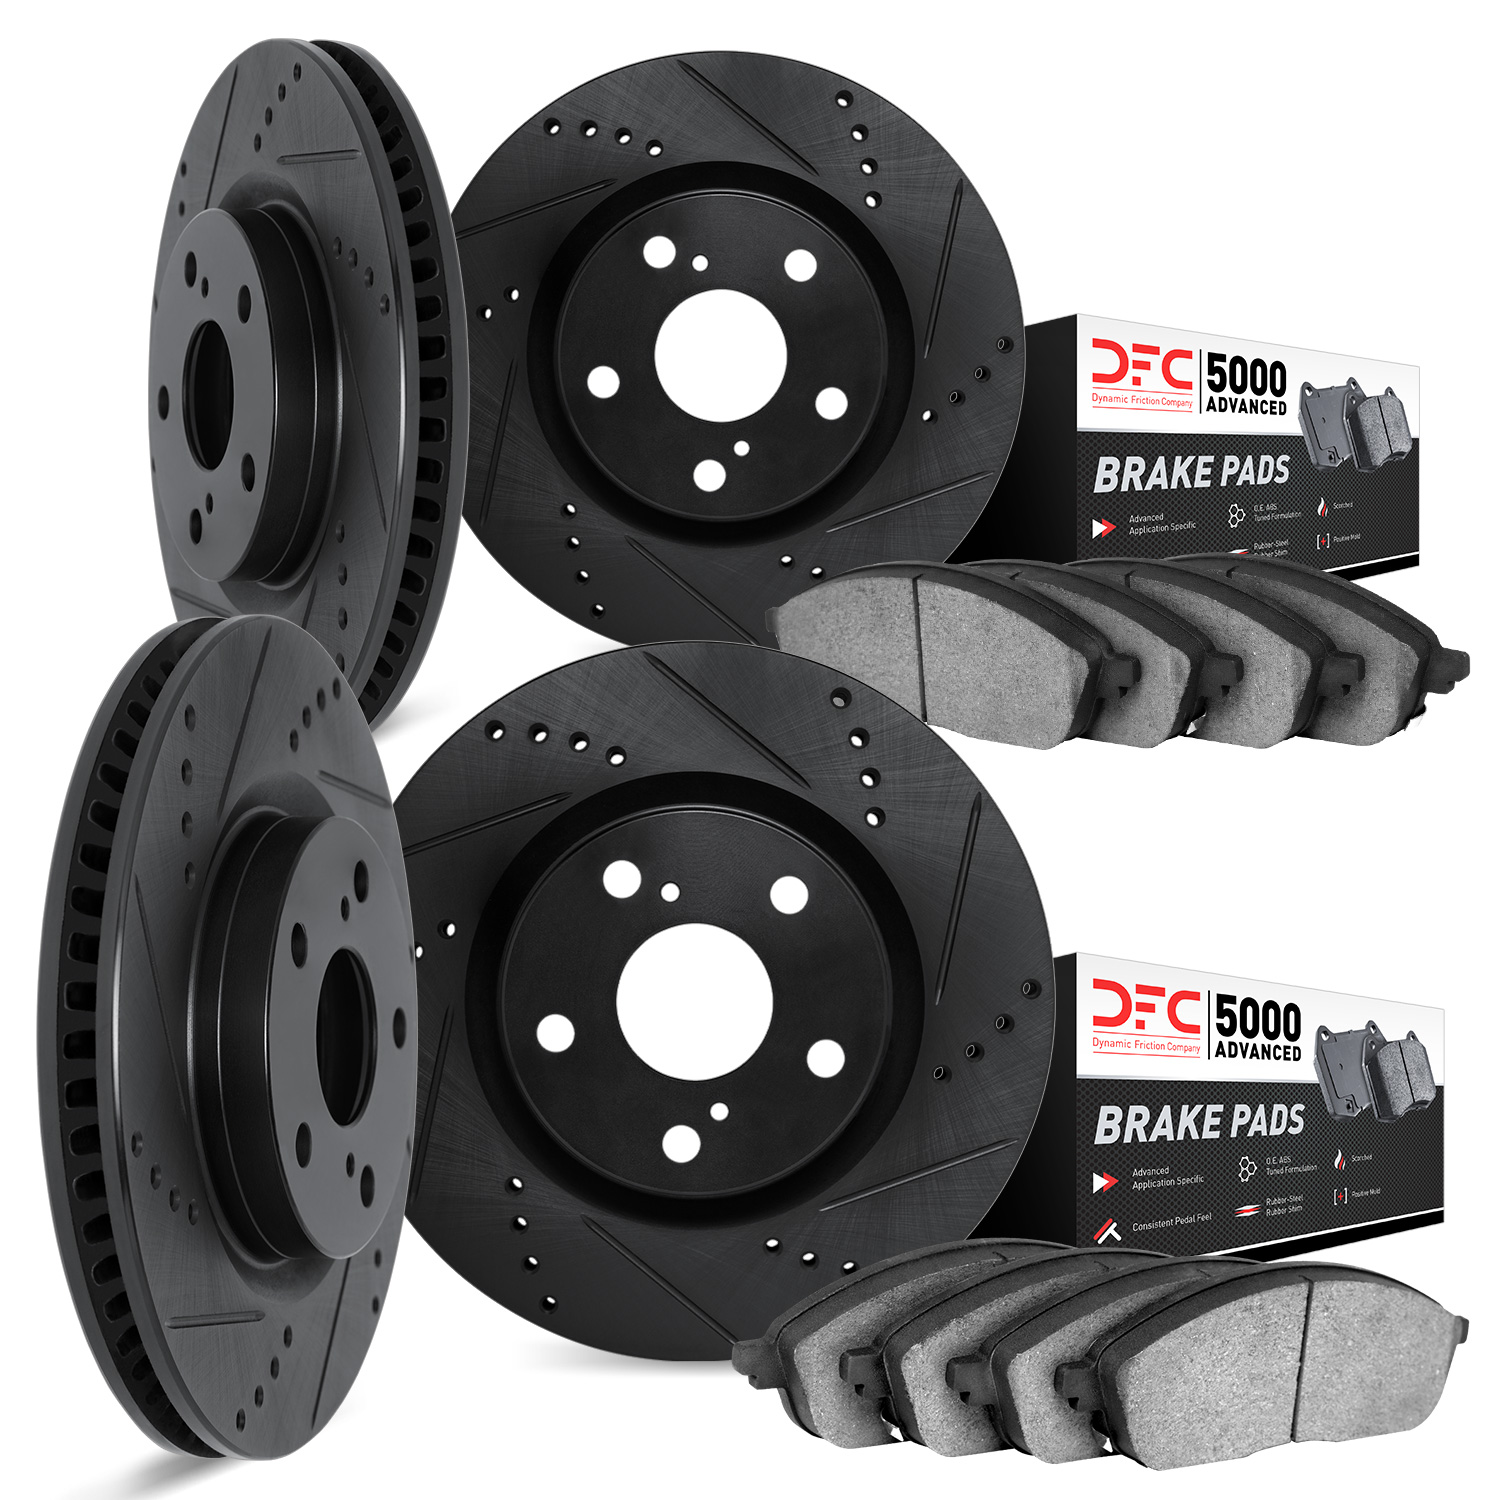 8504-31018 Drilled/Slotted Brake Rotors w/5000 Advanced Brake Pads Kit [Black], 2004-2010 BMW, Position: Front and Rear